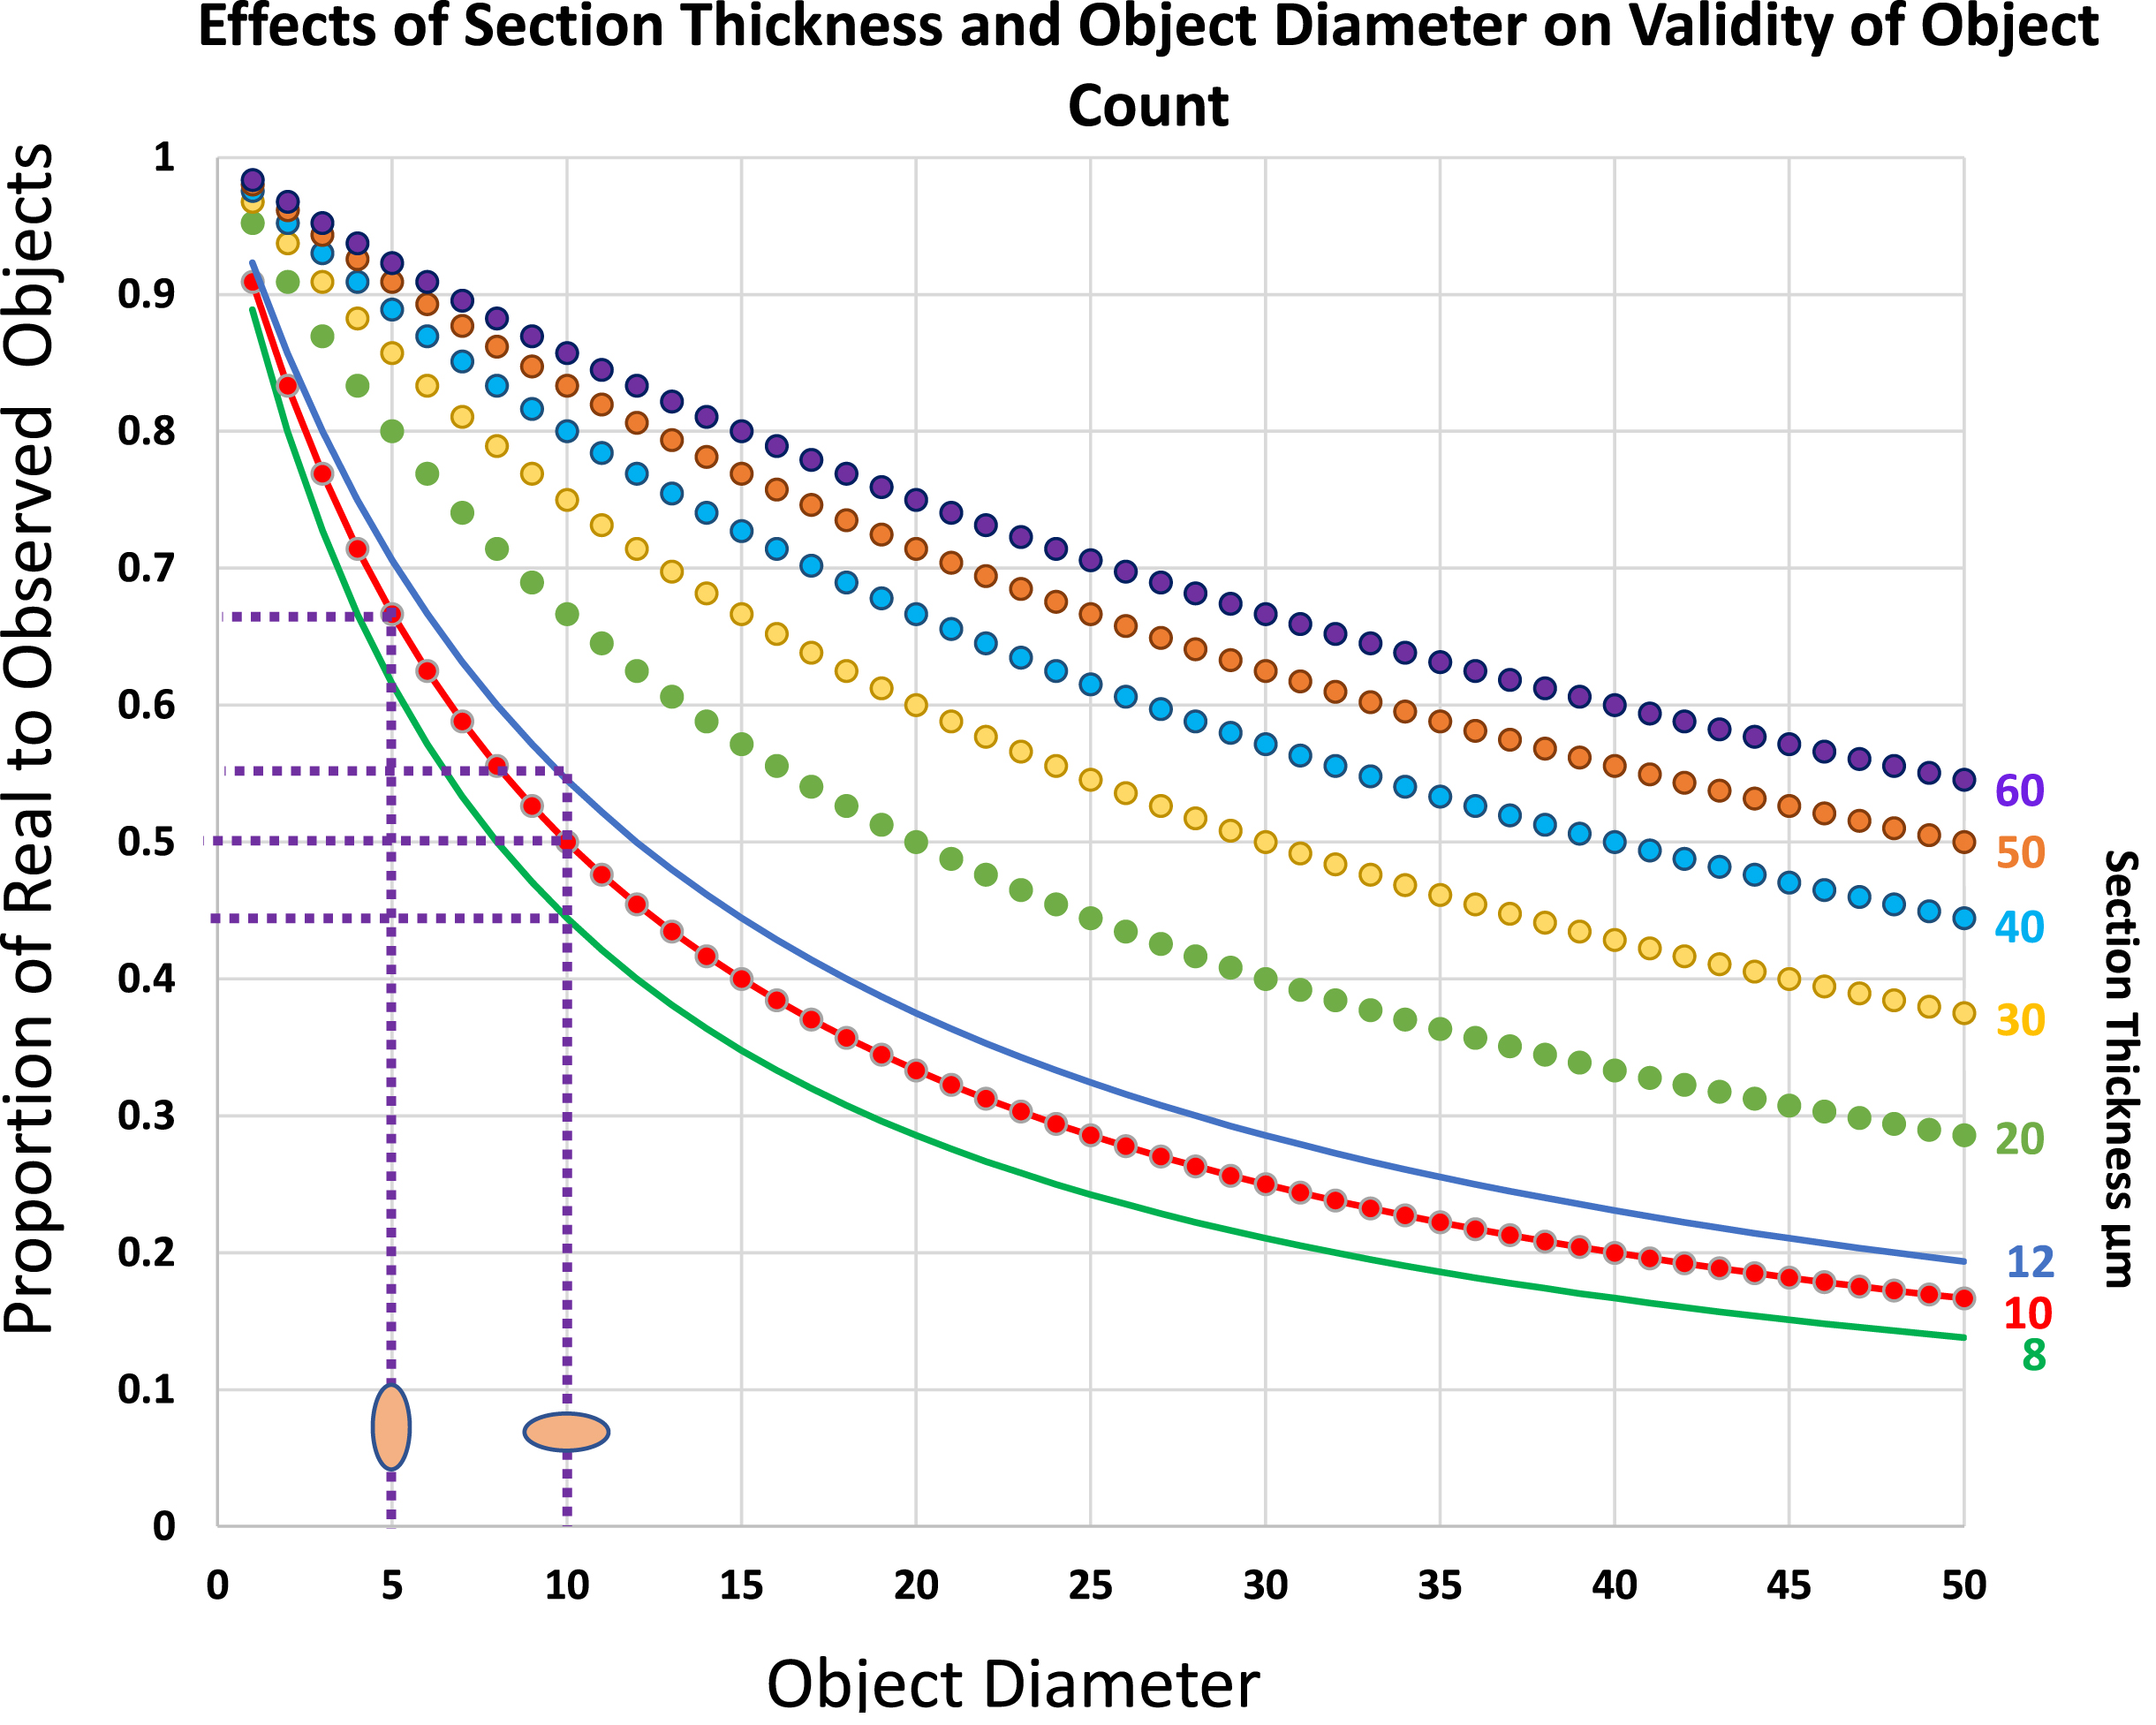 Plots to show the real number of objects per section volume as a proportion of the number of counted objects of various diameters, D, within sections of varying thickness, T. Note that within the range of sizes that commonly apply to skeletal muscle histology, the effects of small differences in either dimension of the object or of section thickness have major effects on the overestimate of object number. Thus, for a 10μm X 5μm satellite cell nucleus its number per 10μm thick section will be overestimated by a factor of 2 if its long axis lies at 90° to the plane of the section but only by a factor of 1.5 if the long axis lies parallel to the plane of section, a difference of 30%. Similarly in sections cut at a nominal thickness of 10μm, a variation of 2μm on either side would shift the over-estimate of numbers from 2.25 to 1.83, a difference of 20%.